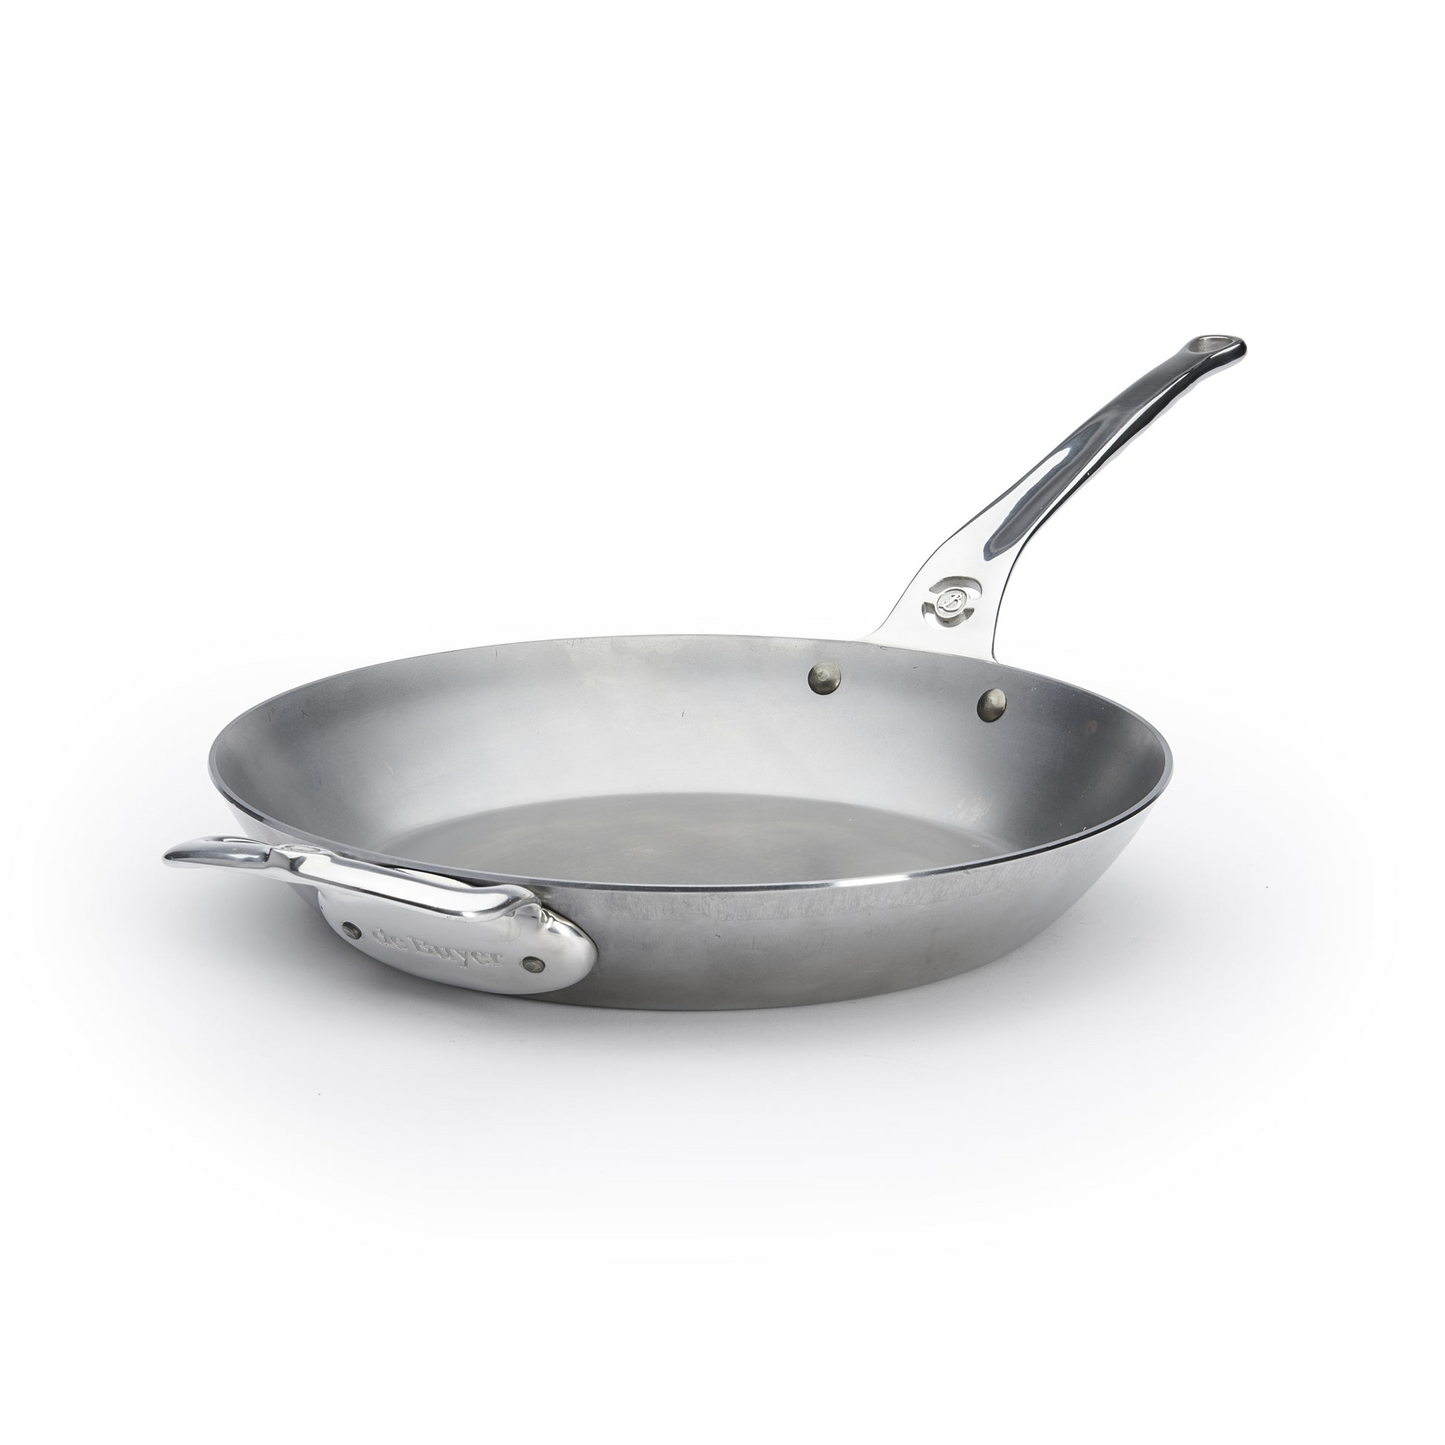 MINERAL B PRO Carbon Steel Fry Pan